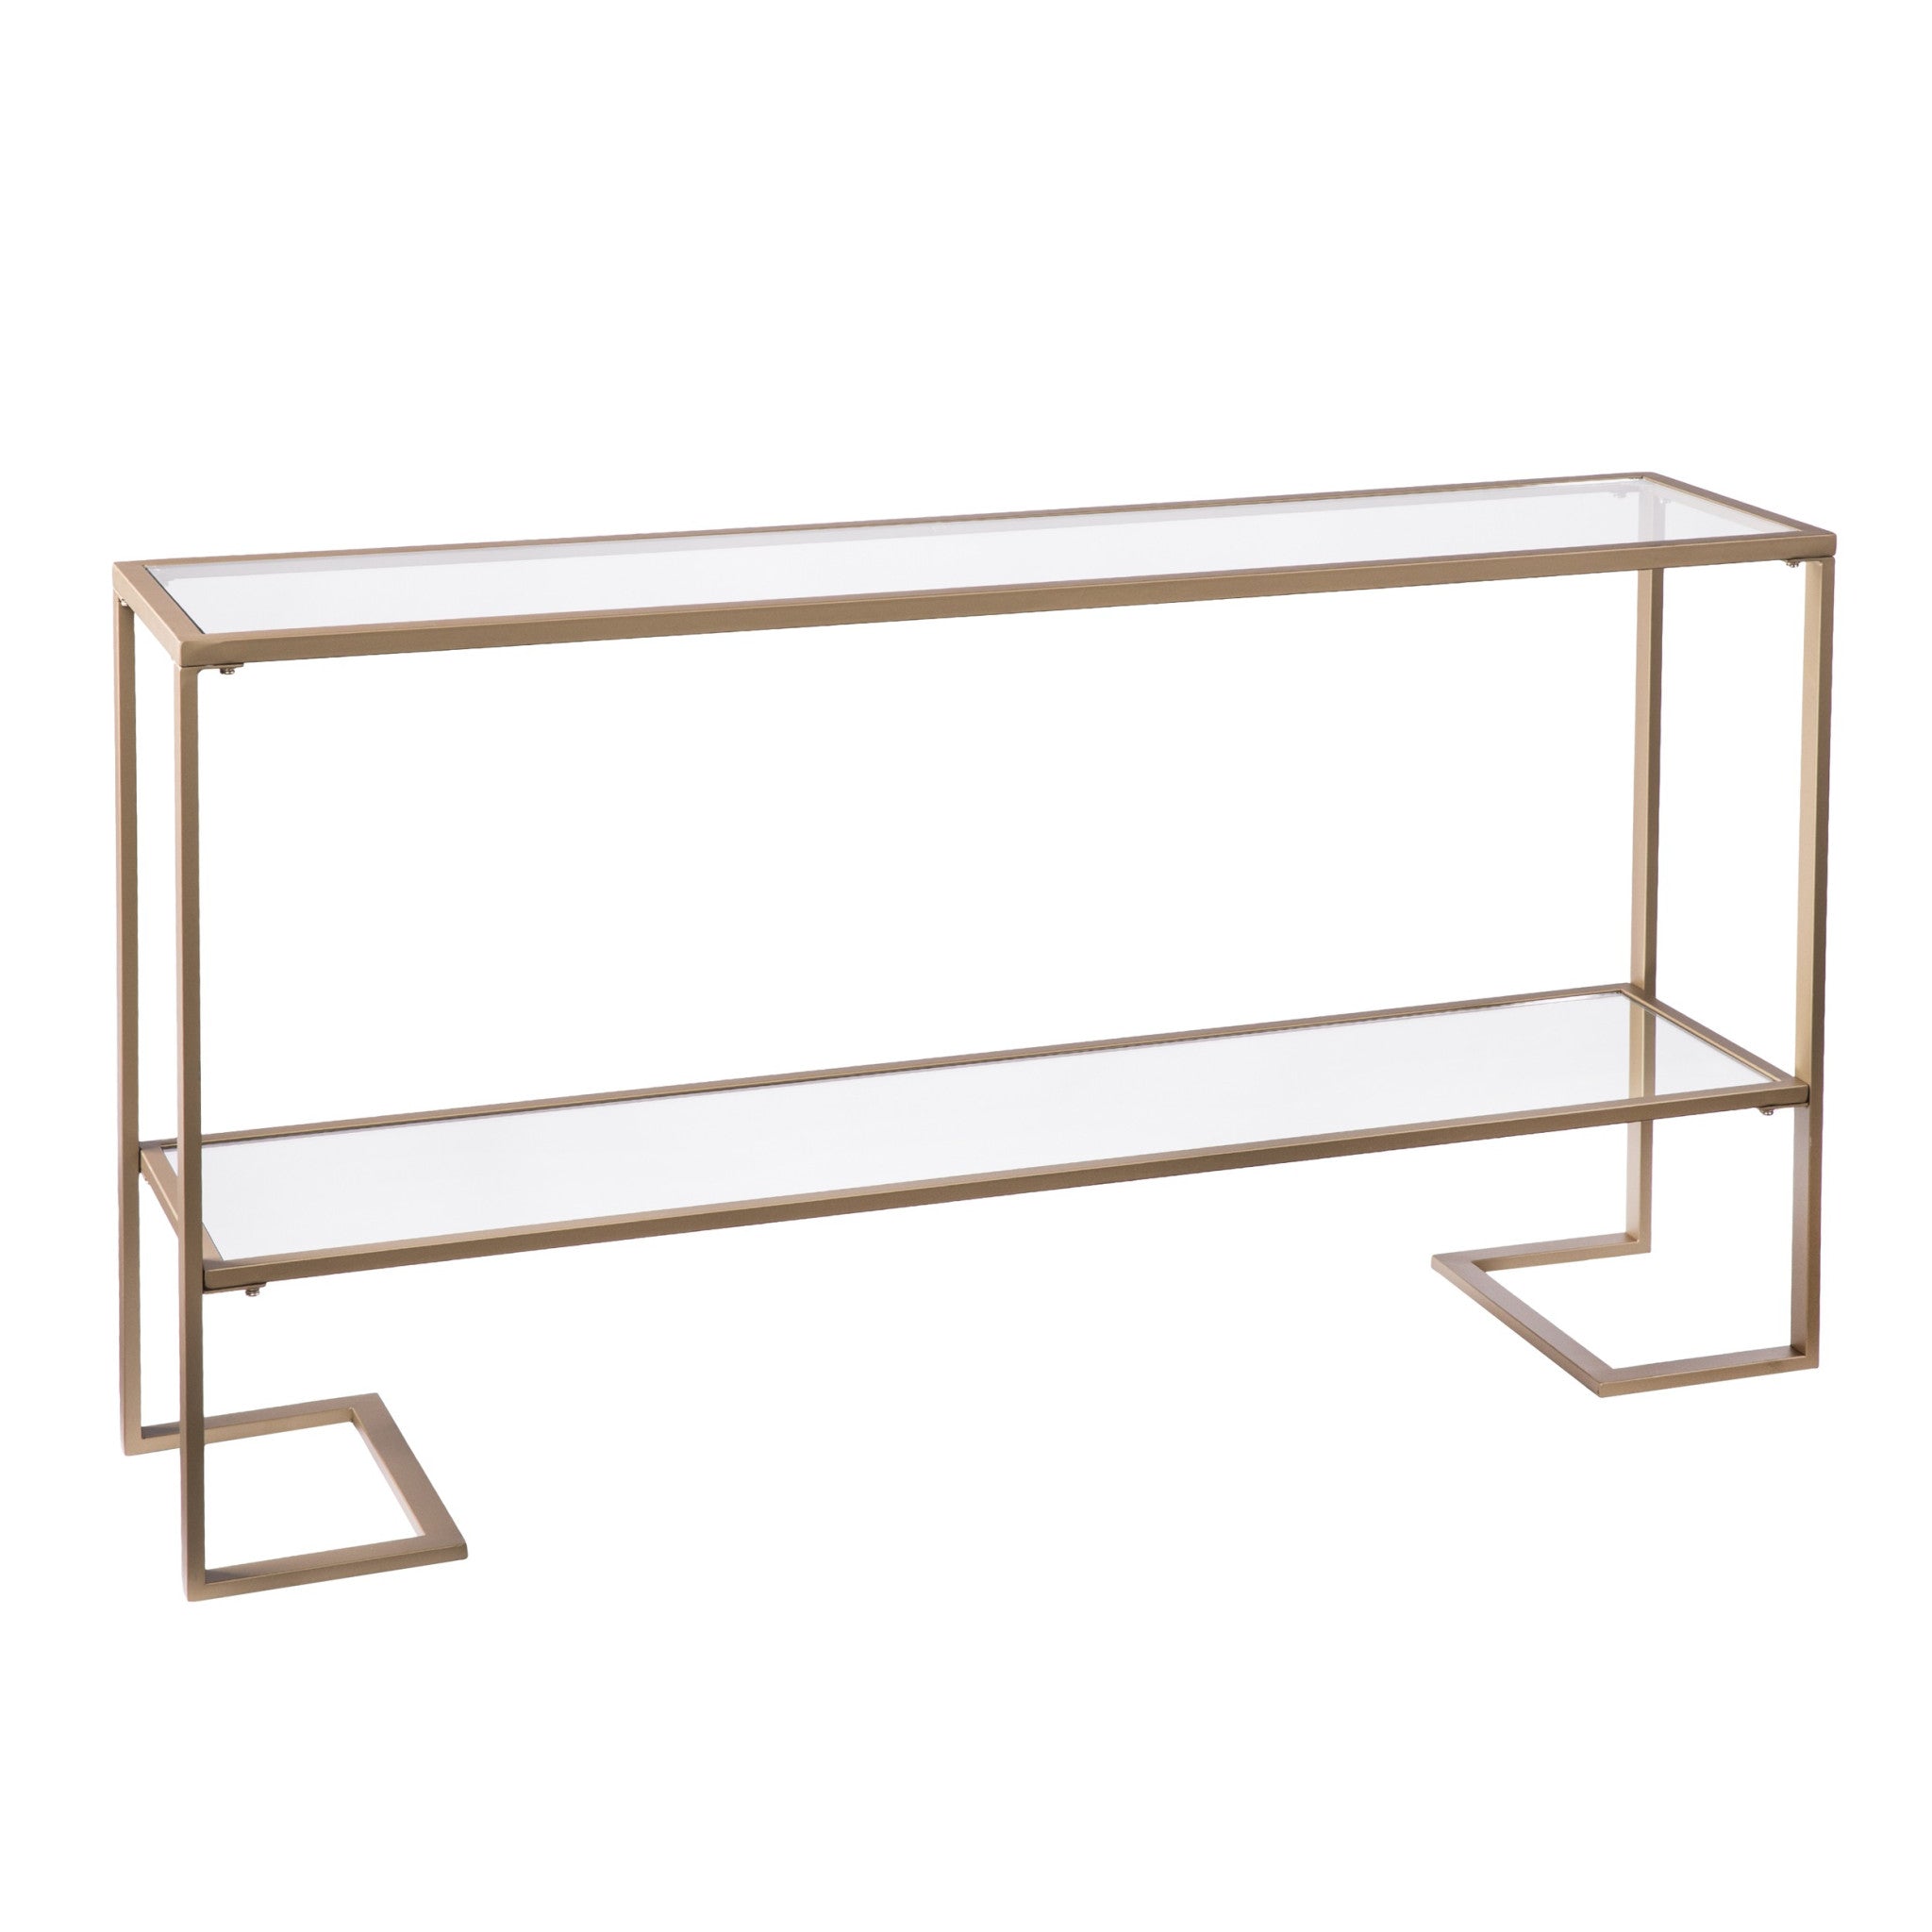 52" Clear and Gold Glass Mirrored Frame Console Table With Storage